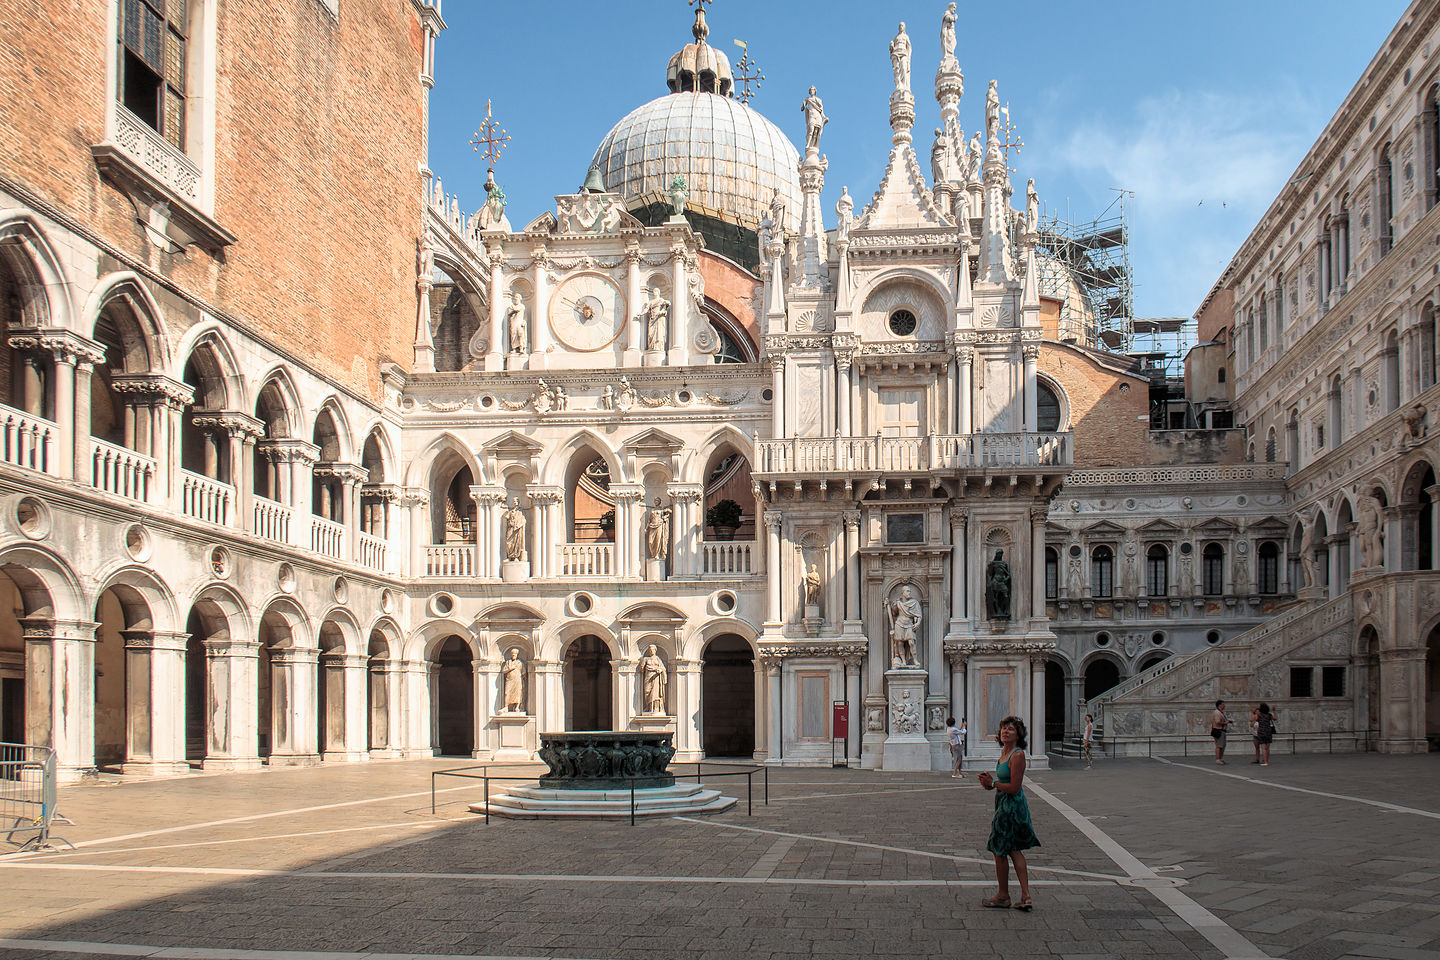 Courtyard of the Doge's Palace